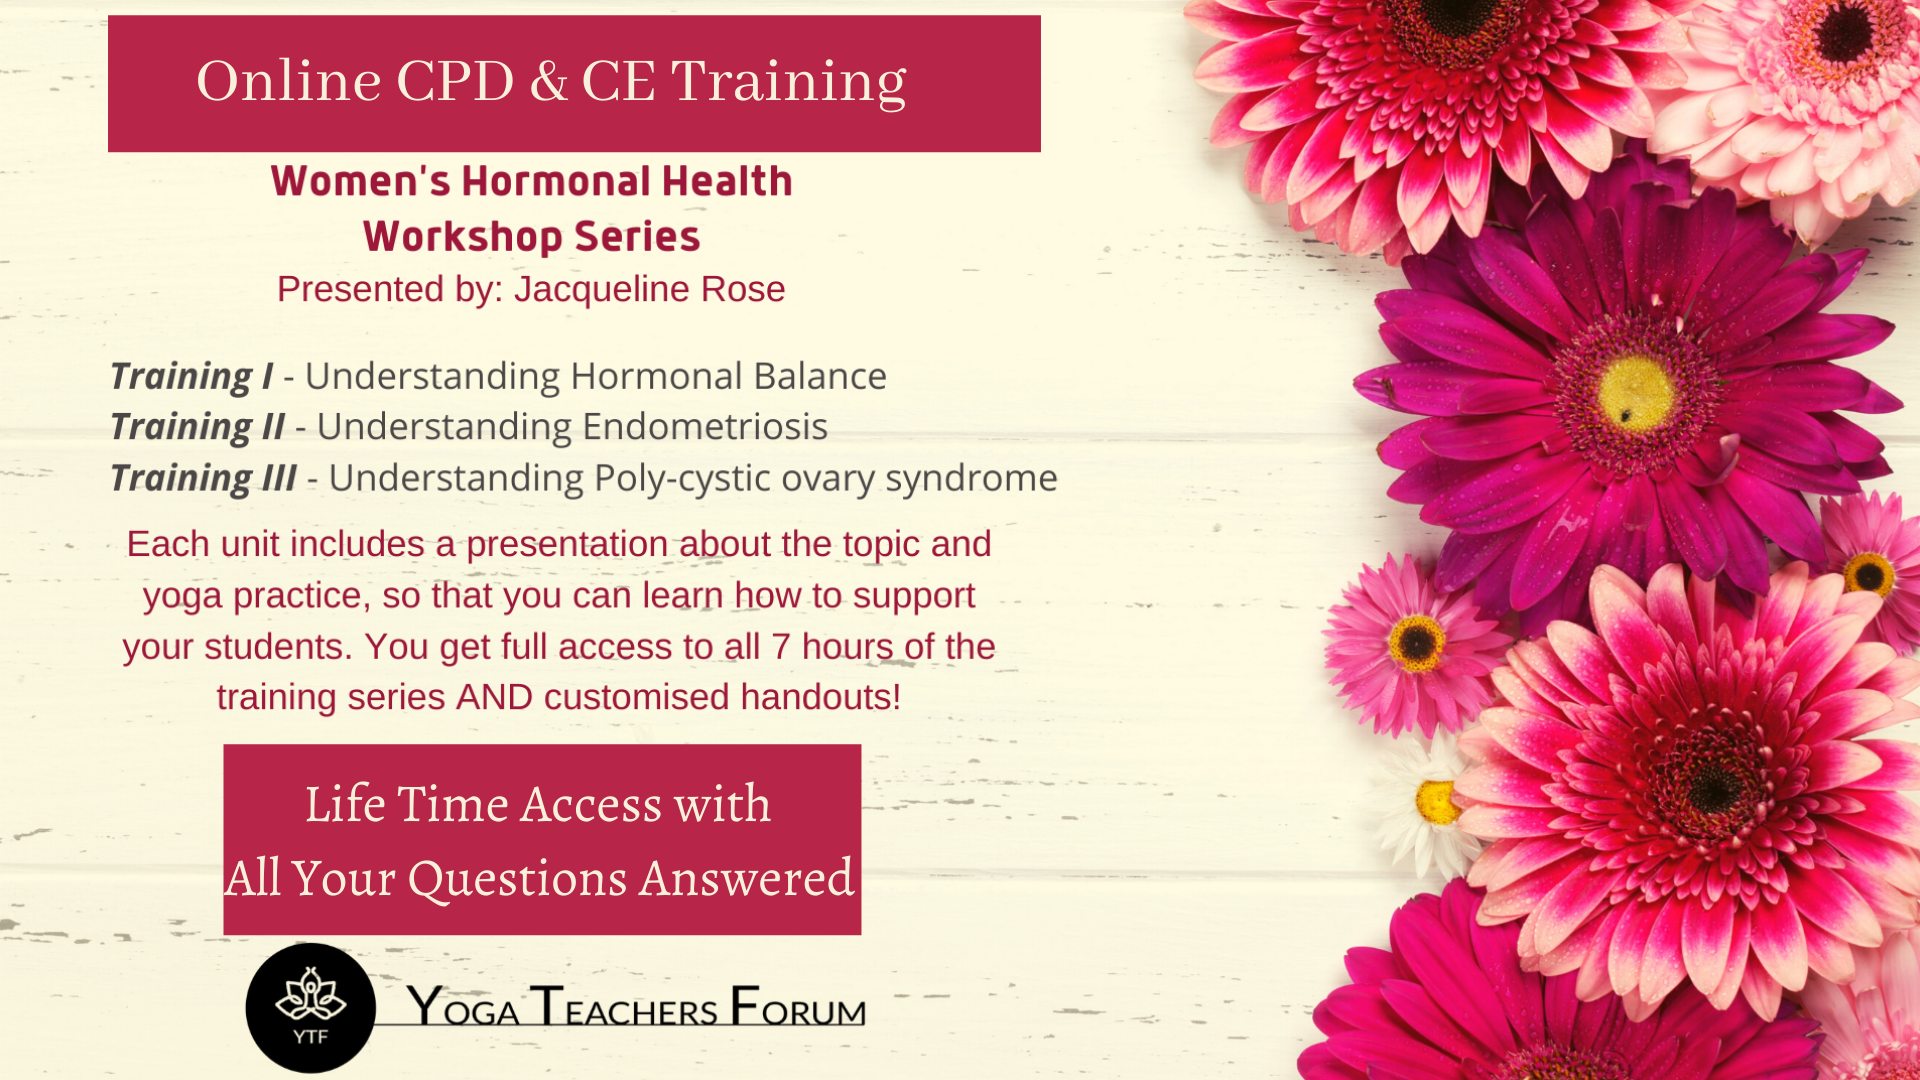 Online CPD & CE Training